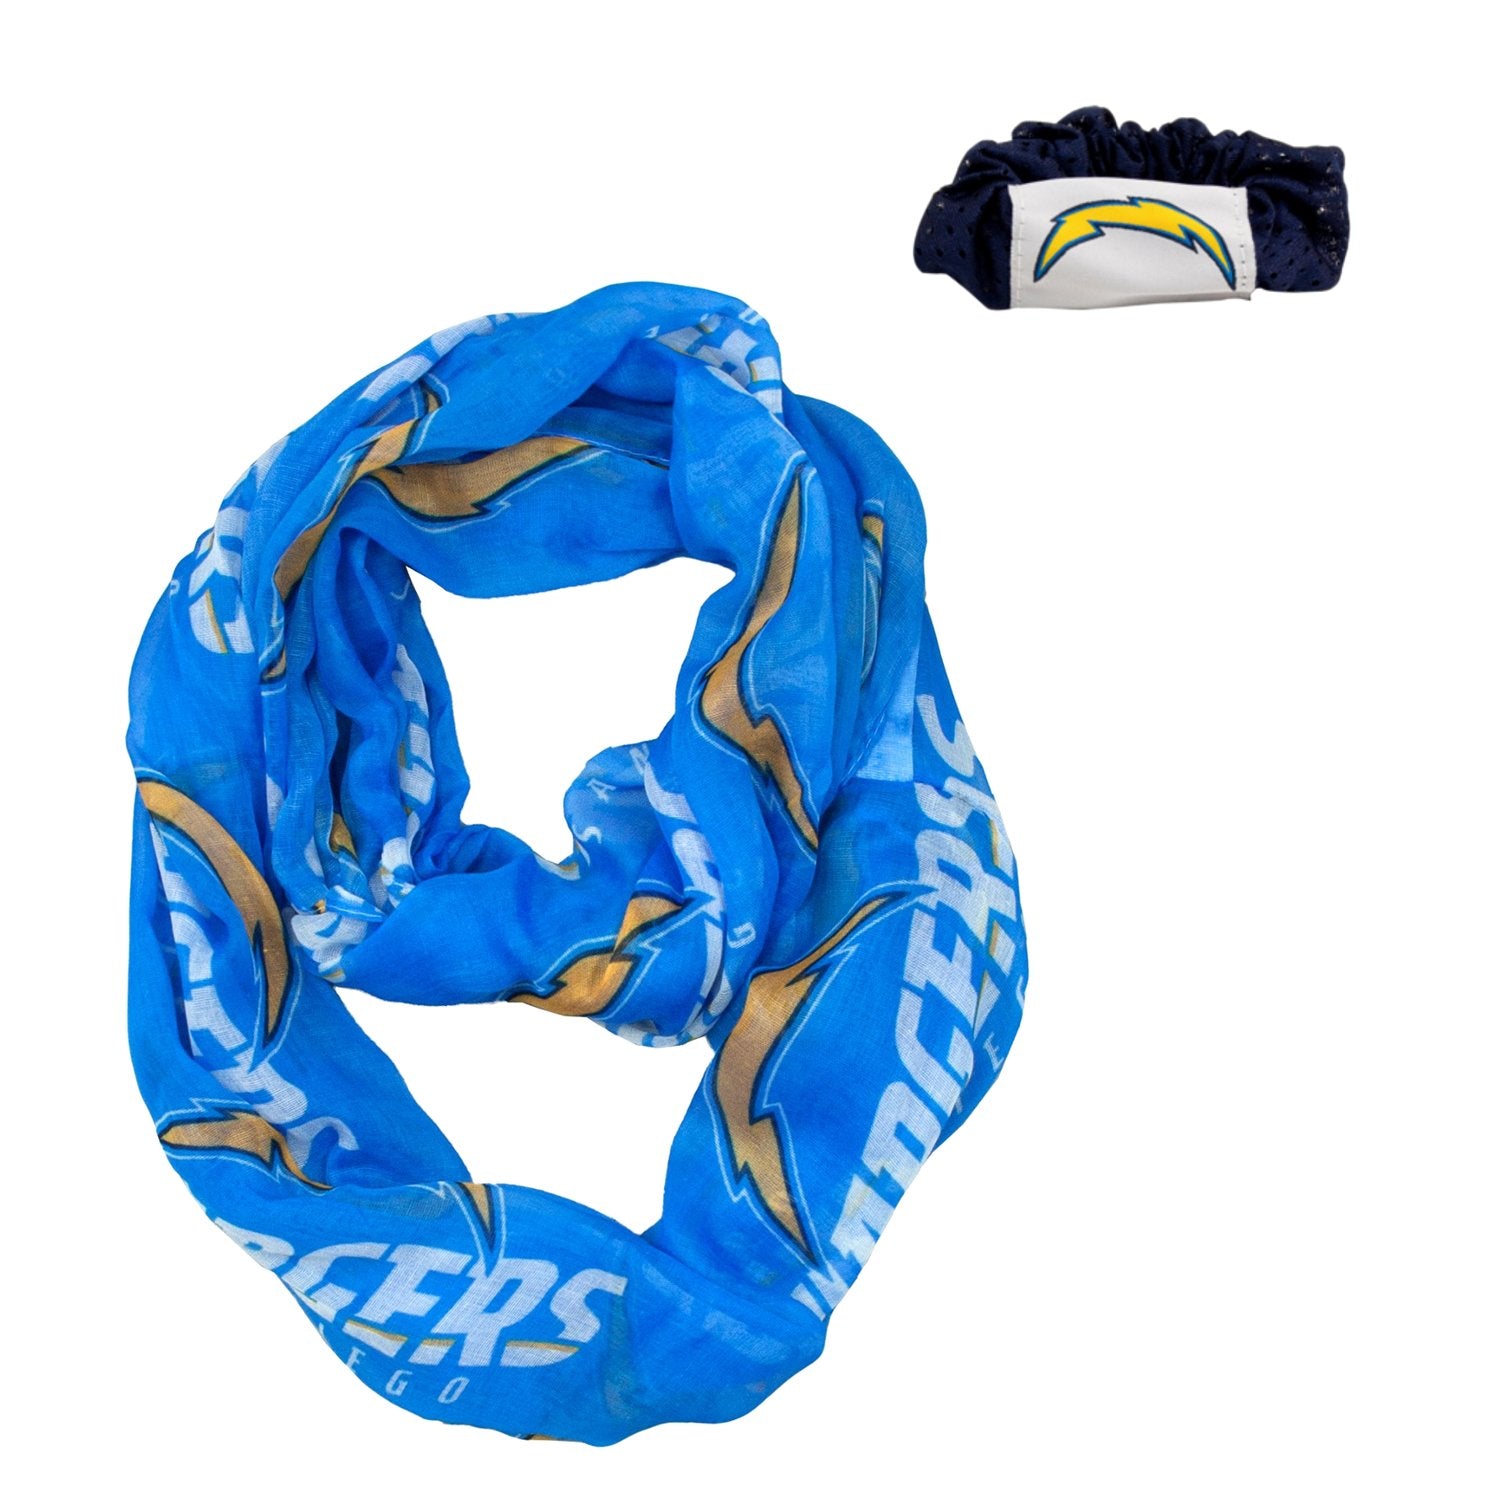 Official National Football League Fan Shop Authentic NFL Womens Infinity Scarf and Hair Scrunchie Bundle Set